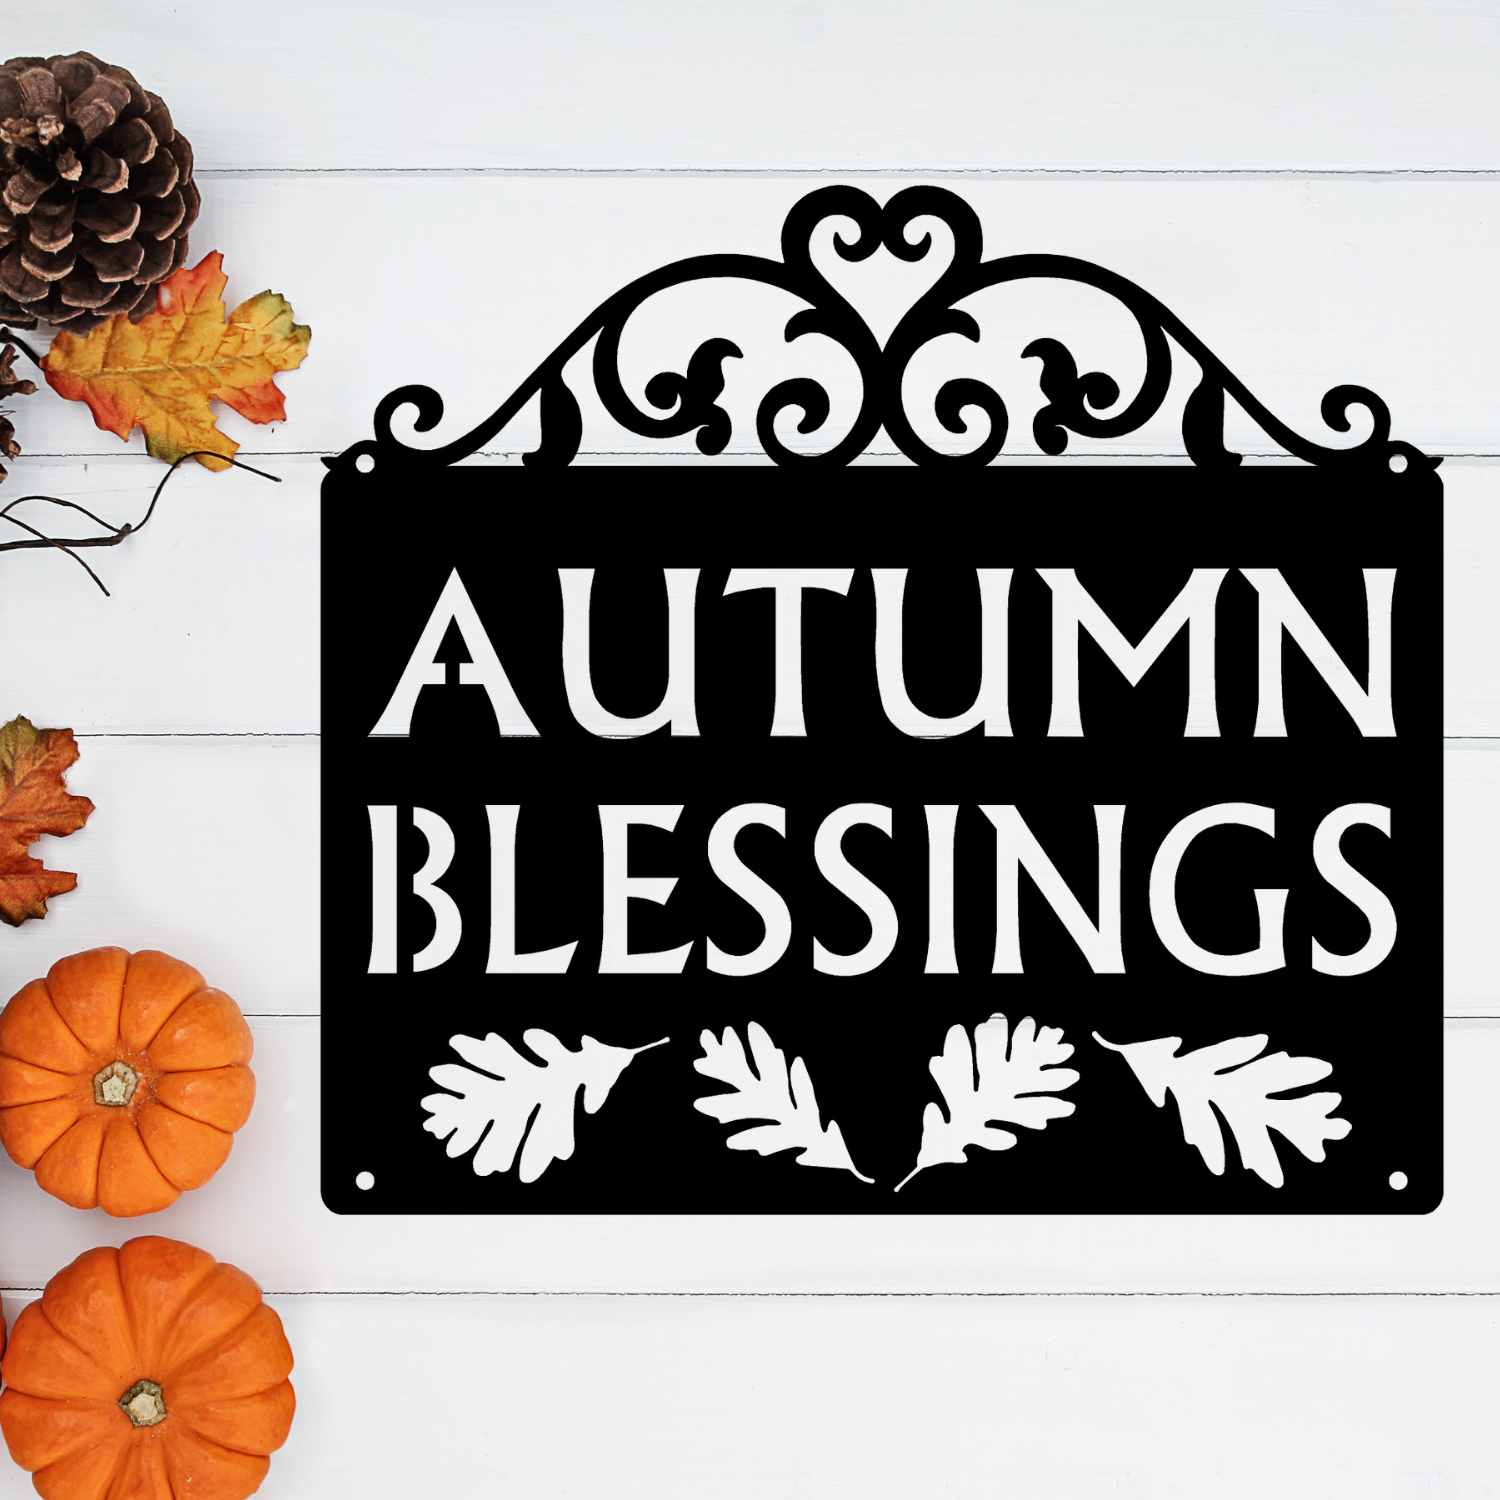 Autumn Blessings Fall Decor Sign - The Metal Peddler Decorative Plaques Blessings, Fall, holiday, porch, wall art, wall decor